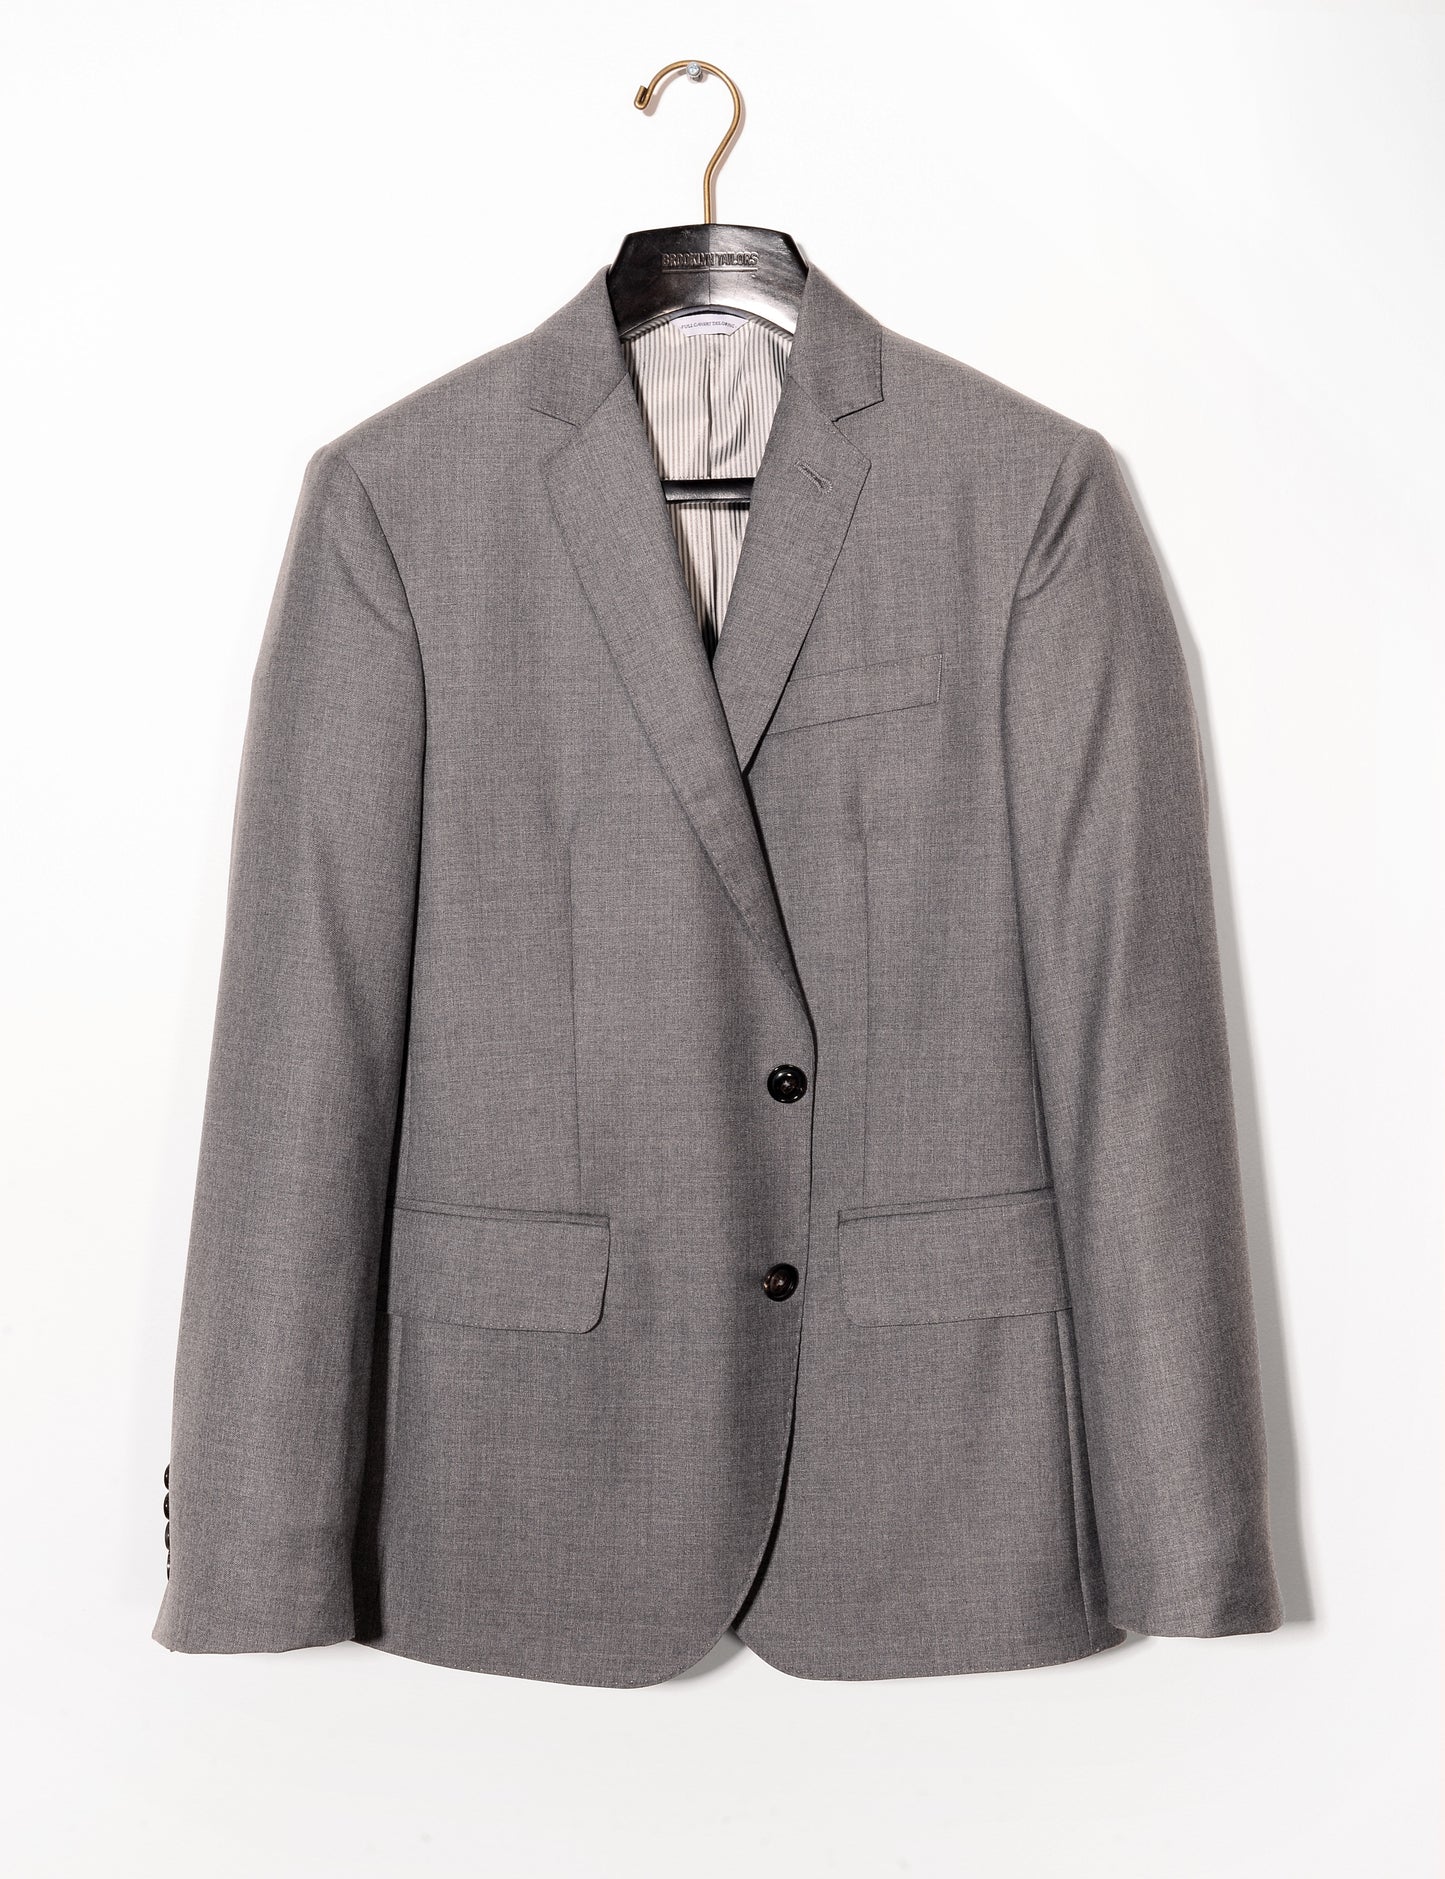 BKT50 Tailored Jacket in Super 110s Twill - Dove Gray